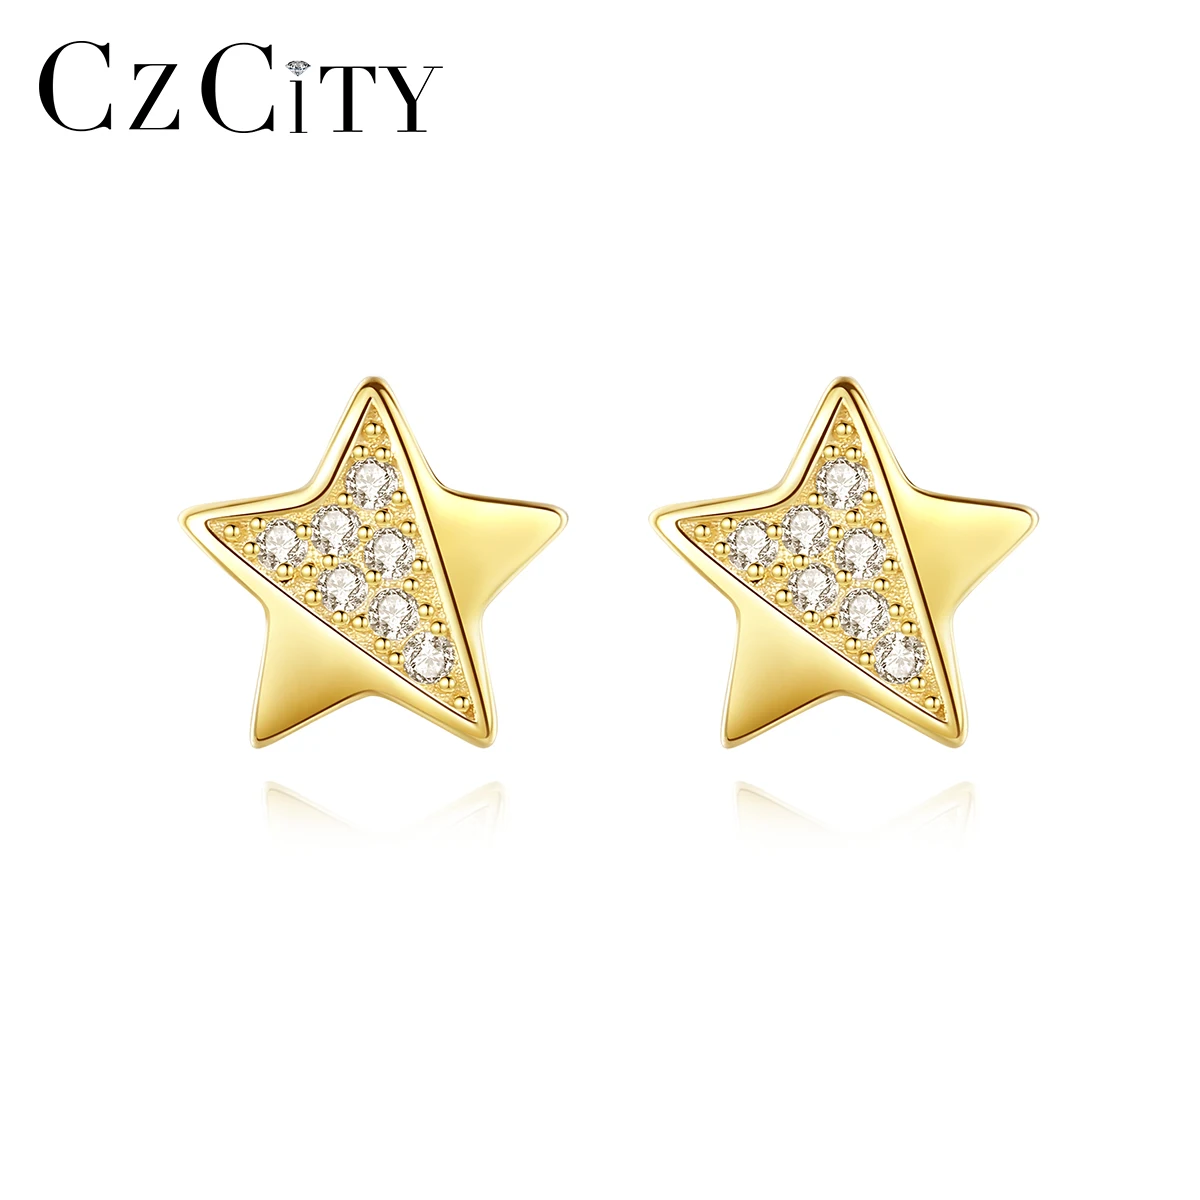 

CZCITY New Simple Star Stud Earring for Women Fine Jewelry Fashion 925 Sterling Silver CZ Pendientes Femme Bijoux Christmas Gift